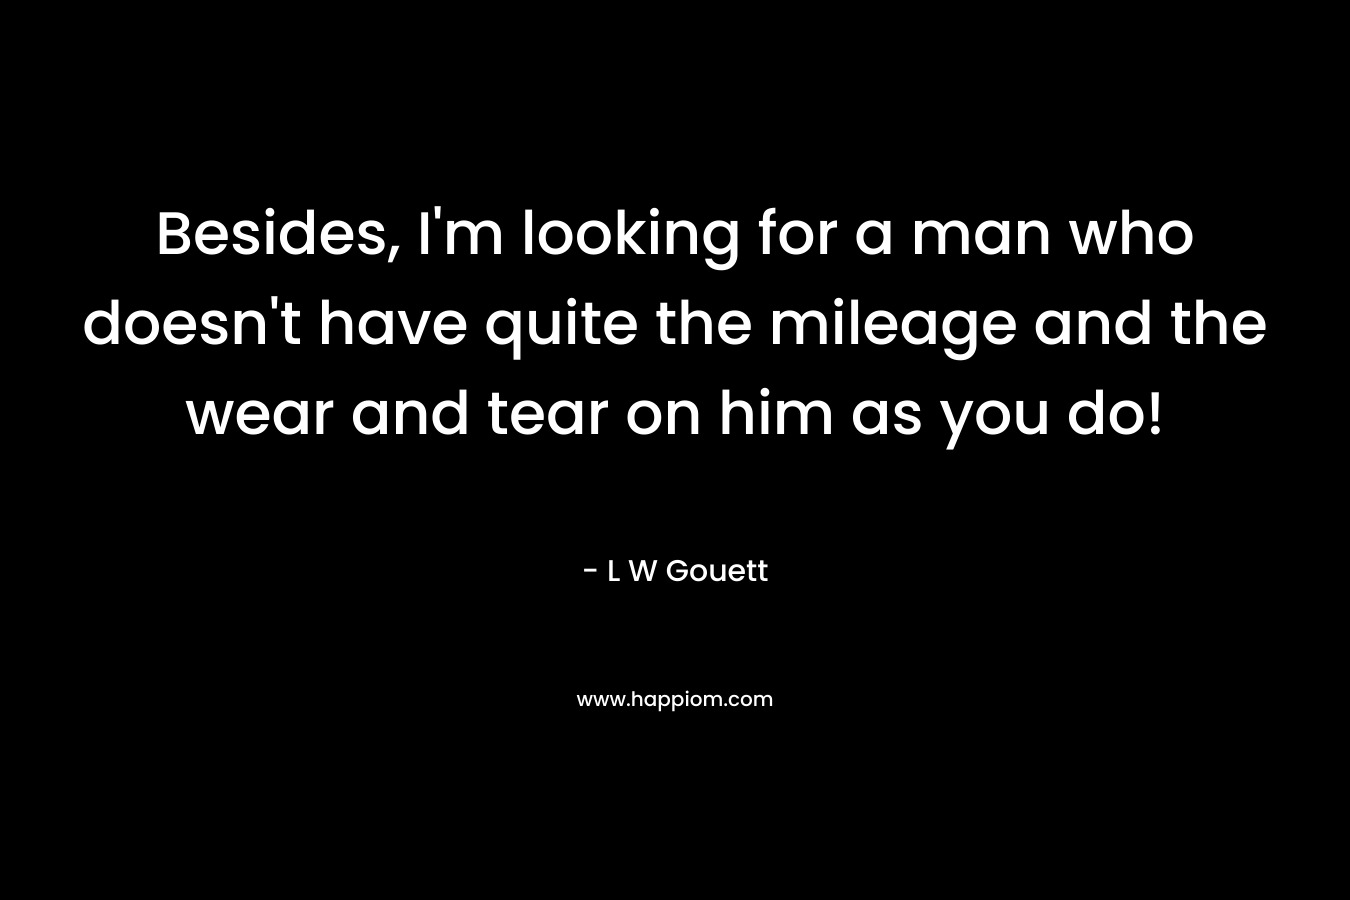 Besides, I’m looking for a man who doesn’t have quite the mileage and the wear and tear on him as you do! – L W Gouett